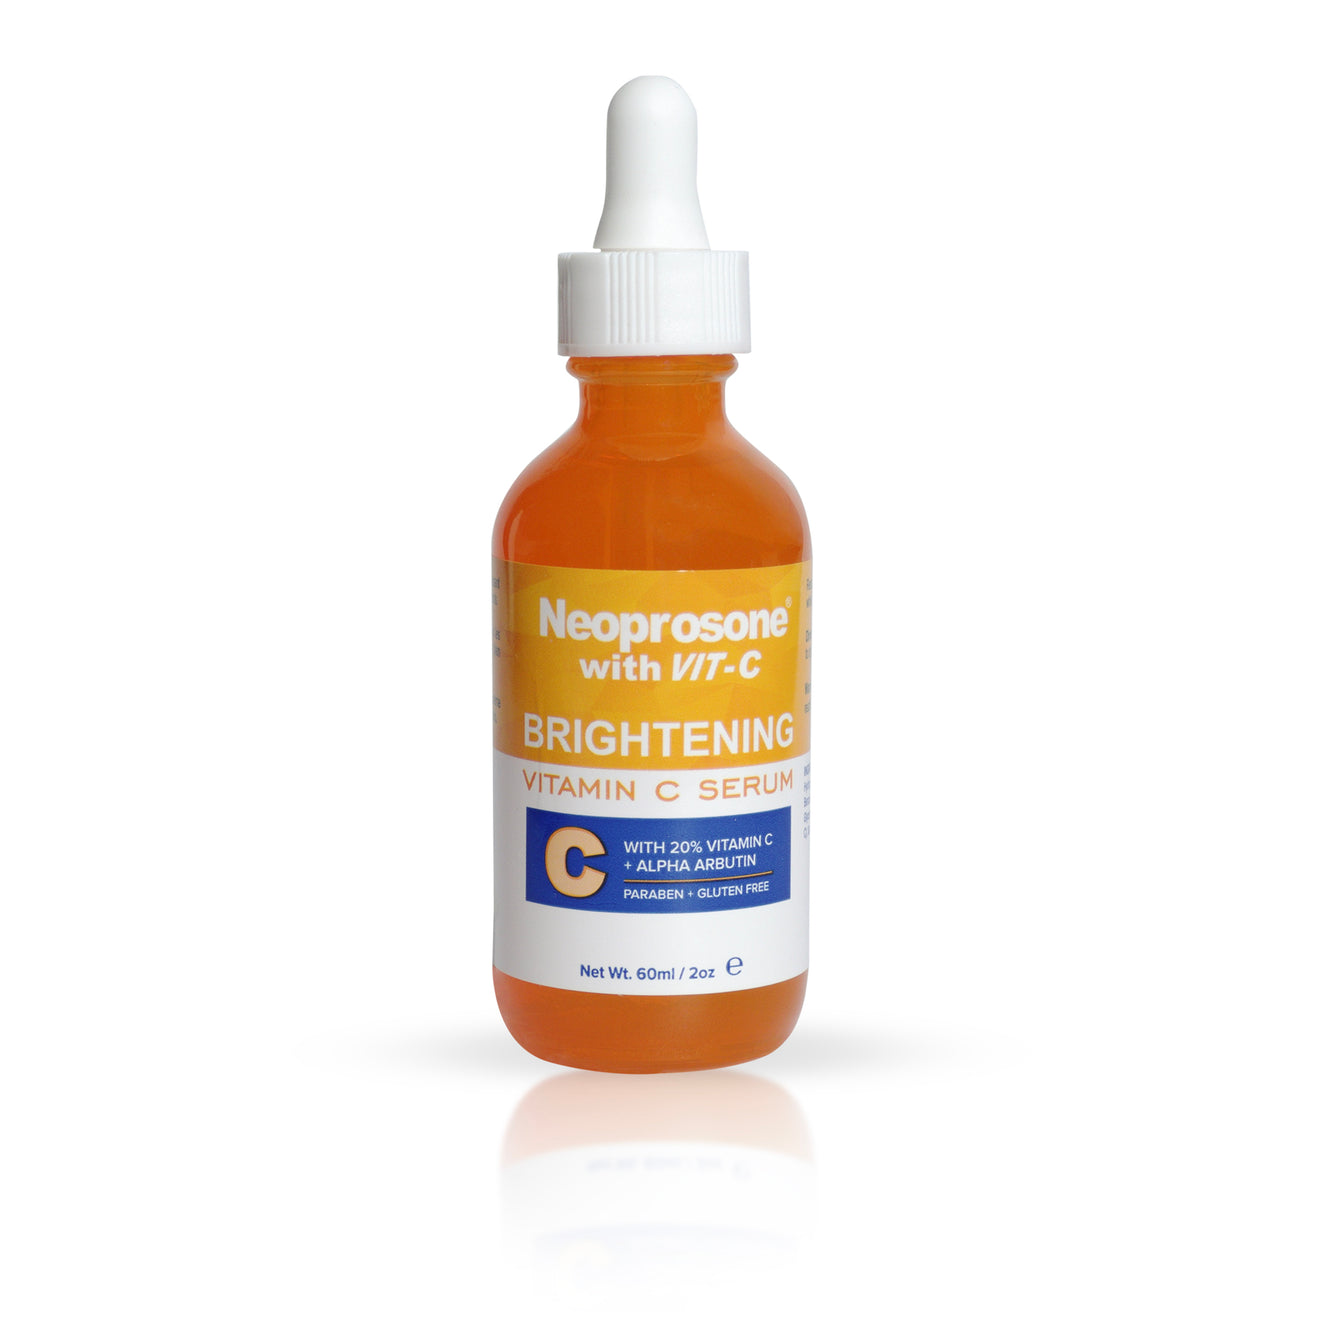 Neoprosone Serum with Vit-C 60ml Mitchell Brands - Mitchell Brands - Skin Lightening, Skin Brightening, Fade Dark Spots, Shea Butter, Hair Growth Products